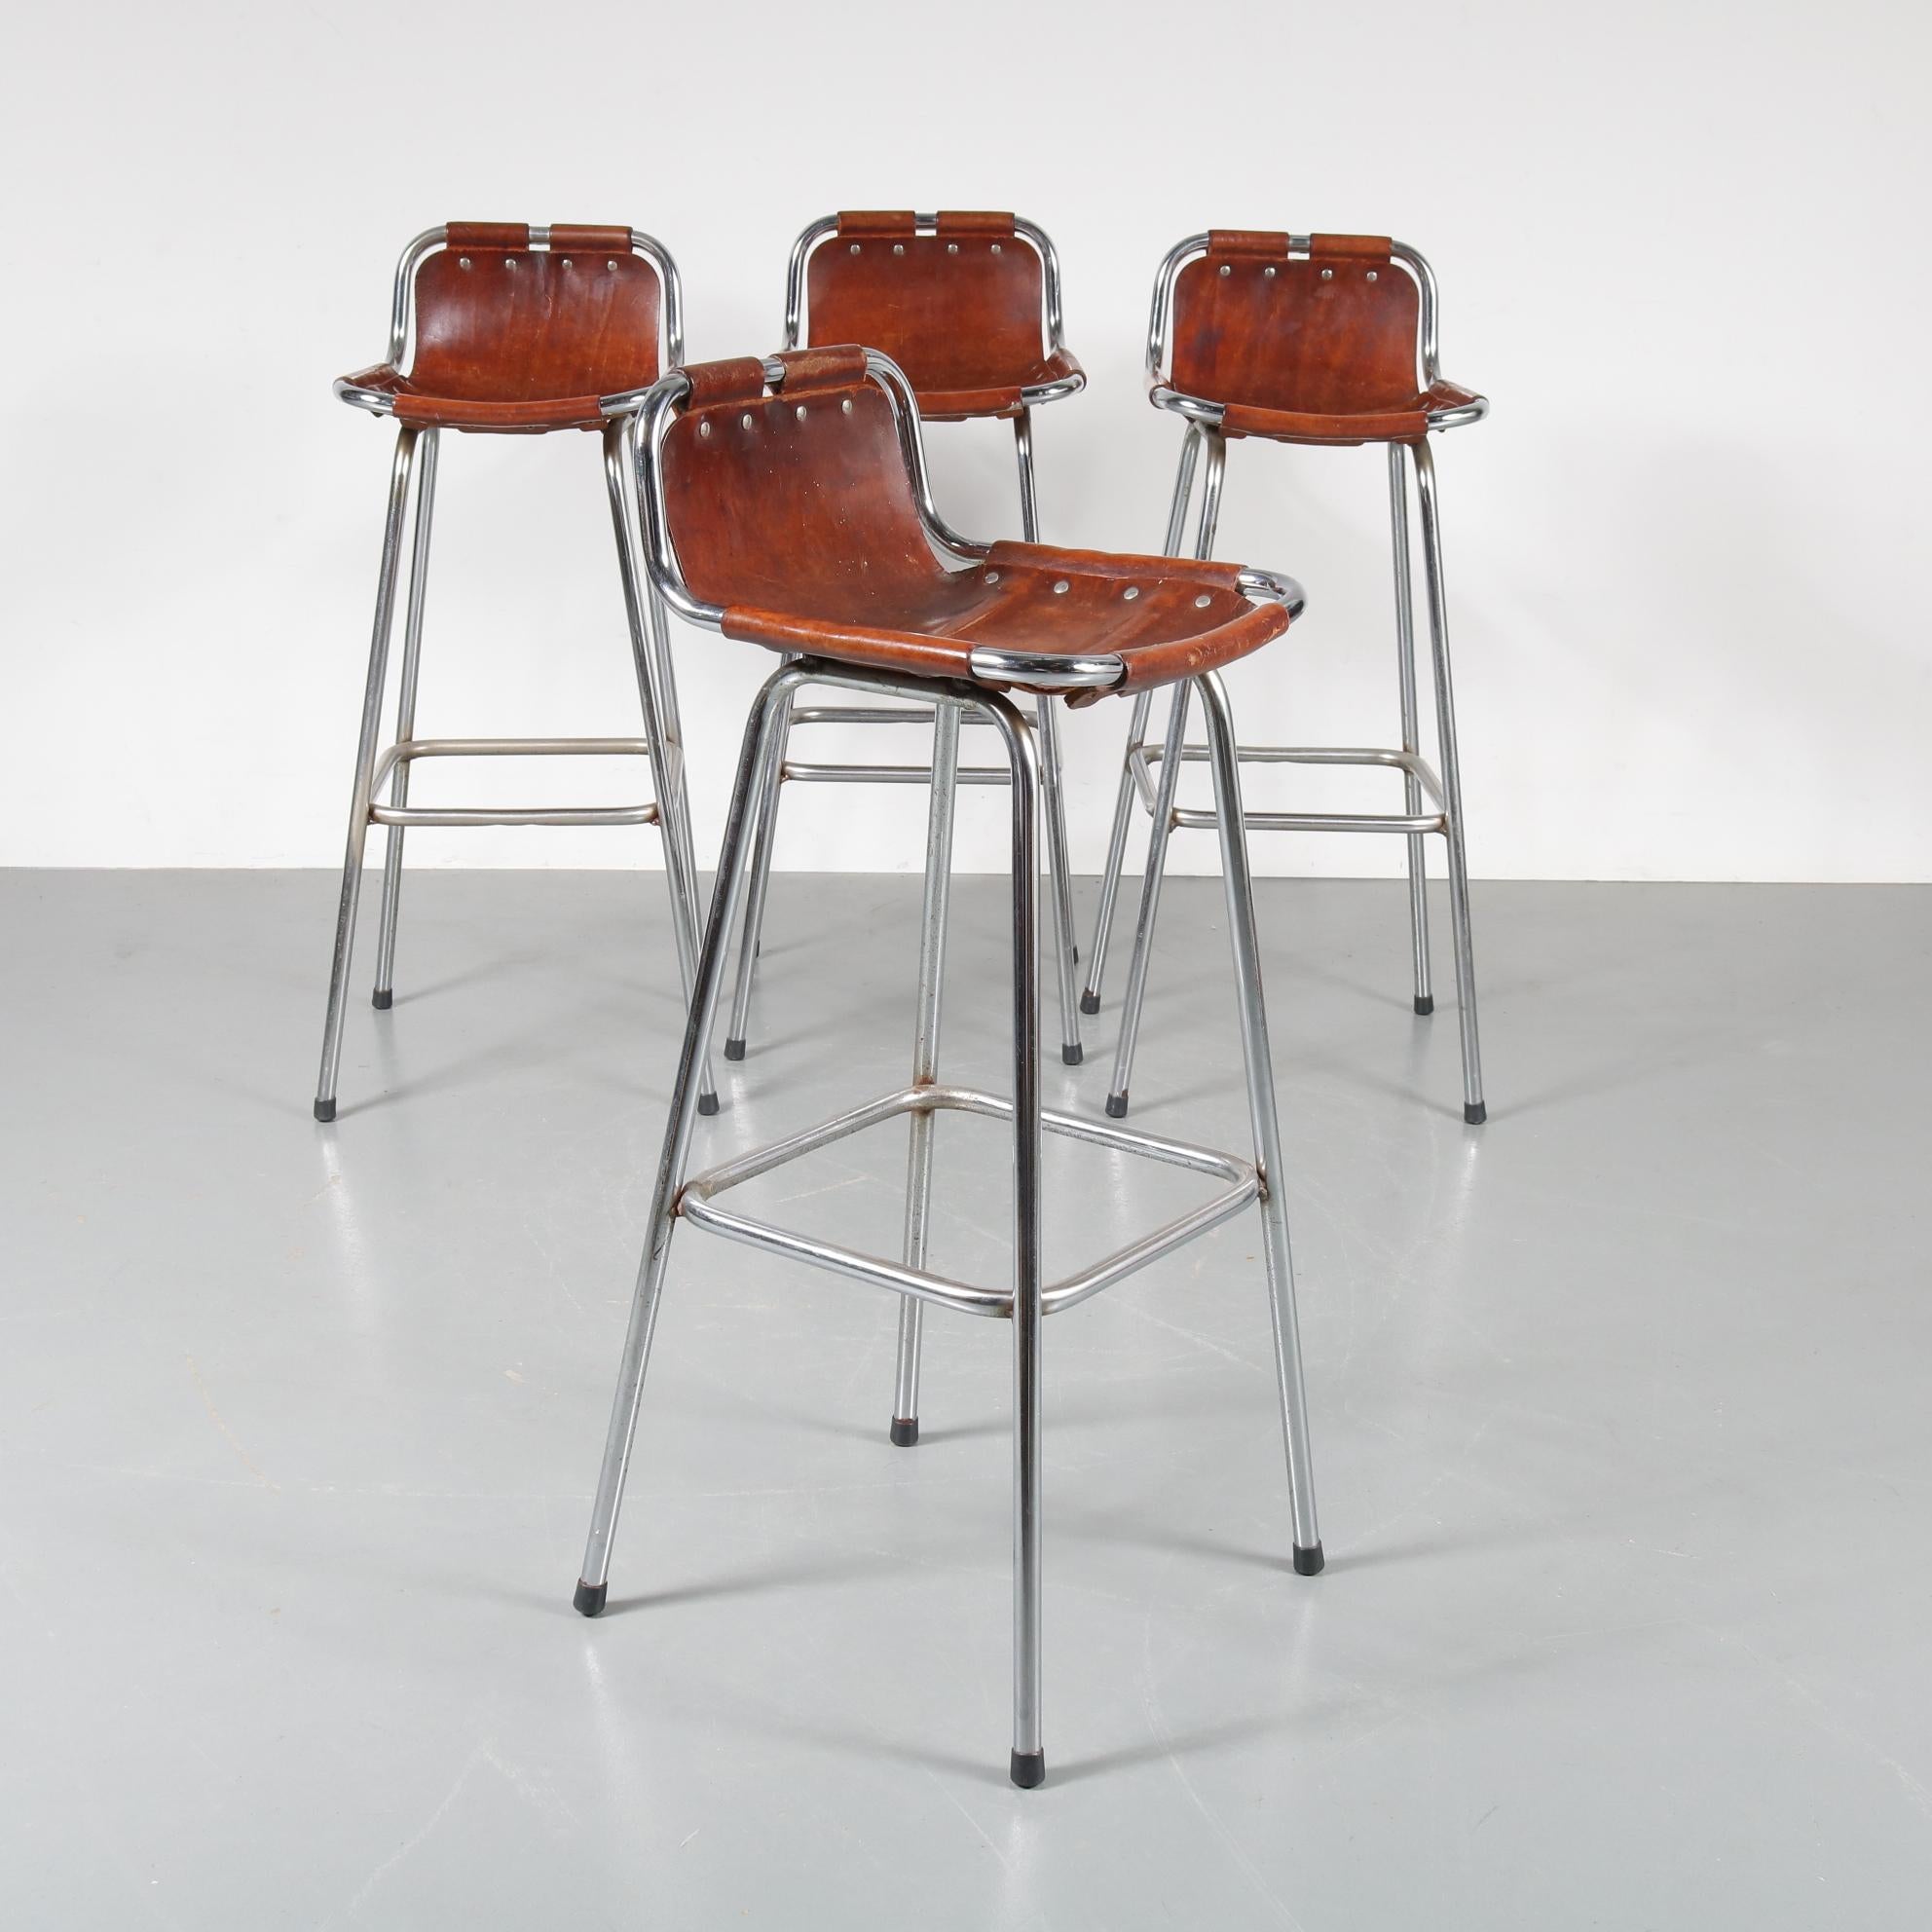 Mid-Century Modern Set of Four Bar Stools Selected by Charlotte Perriand for Les Arcs, circa 1960